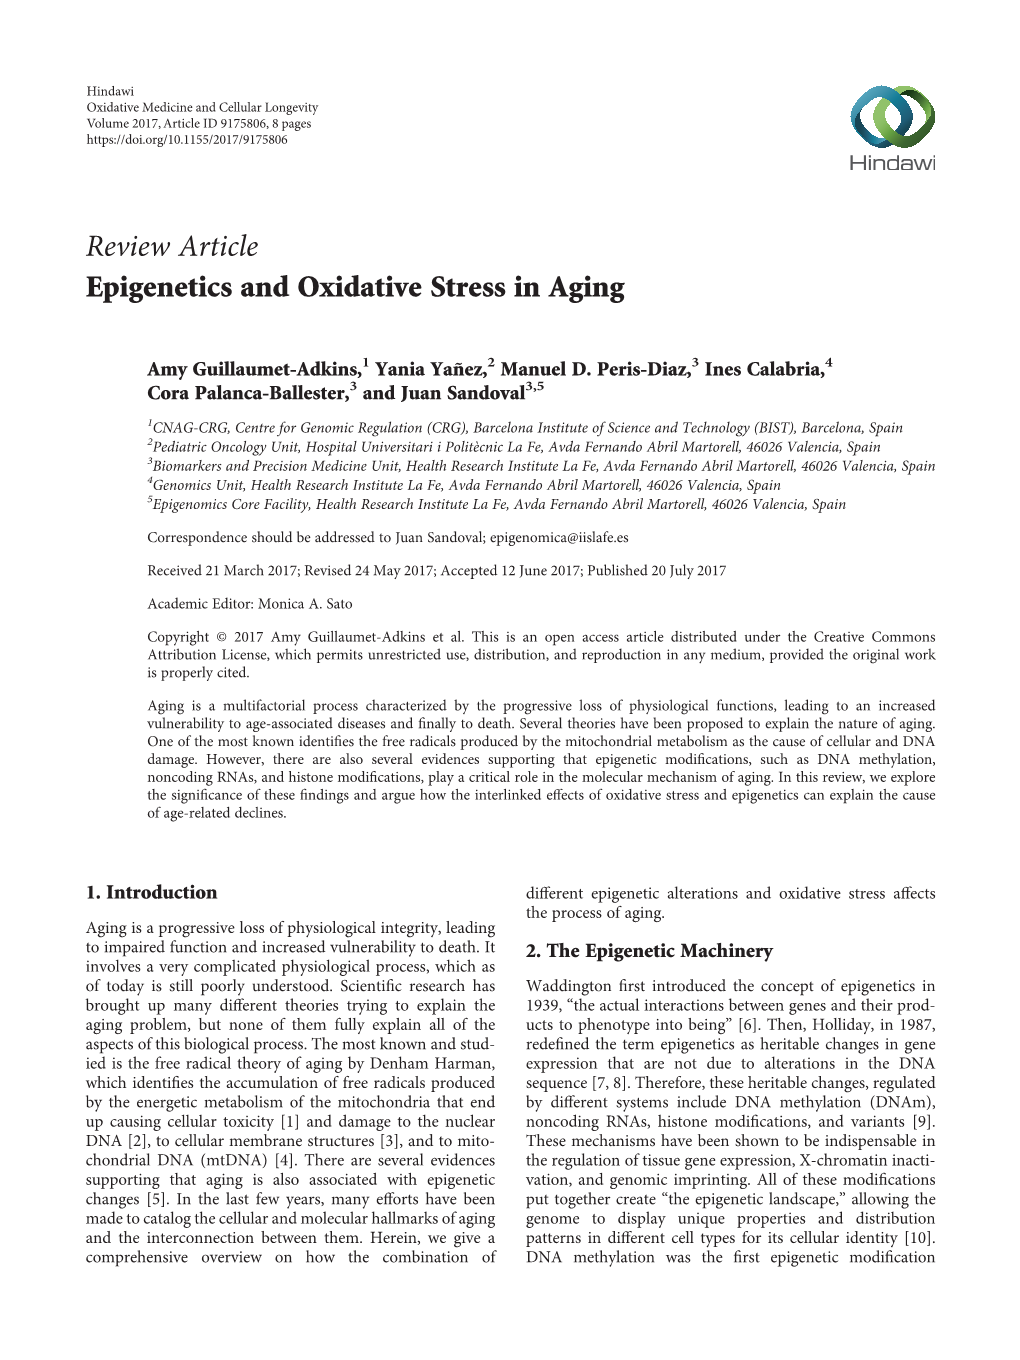 Review Article Epigenetics and Oxidative Stress in Aging